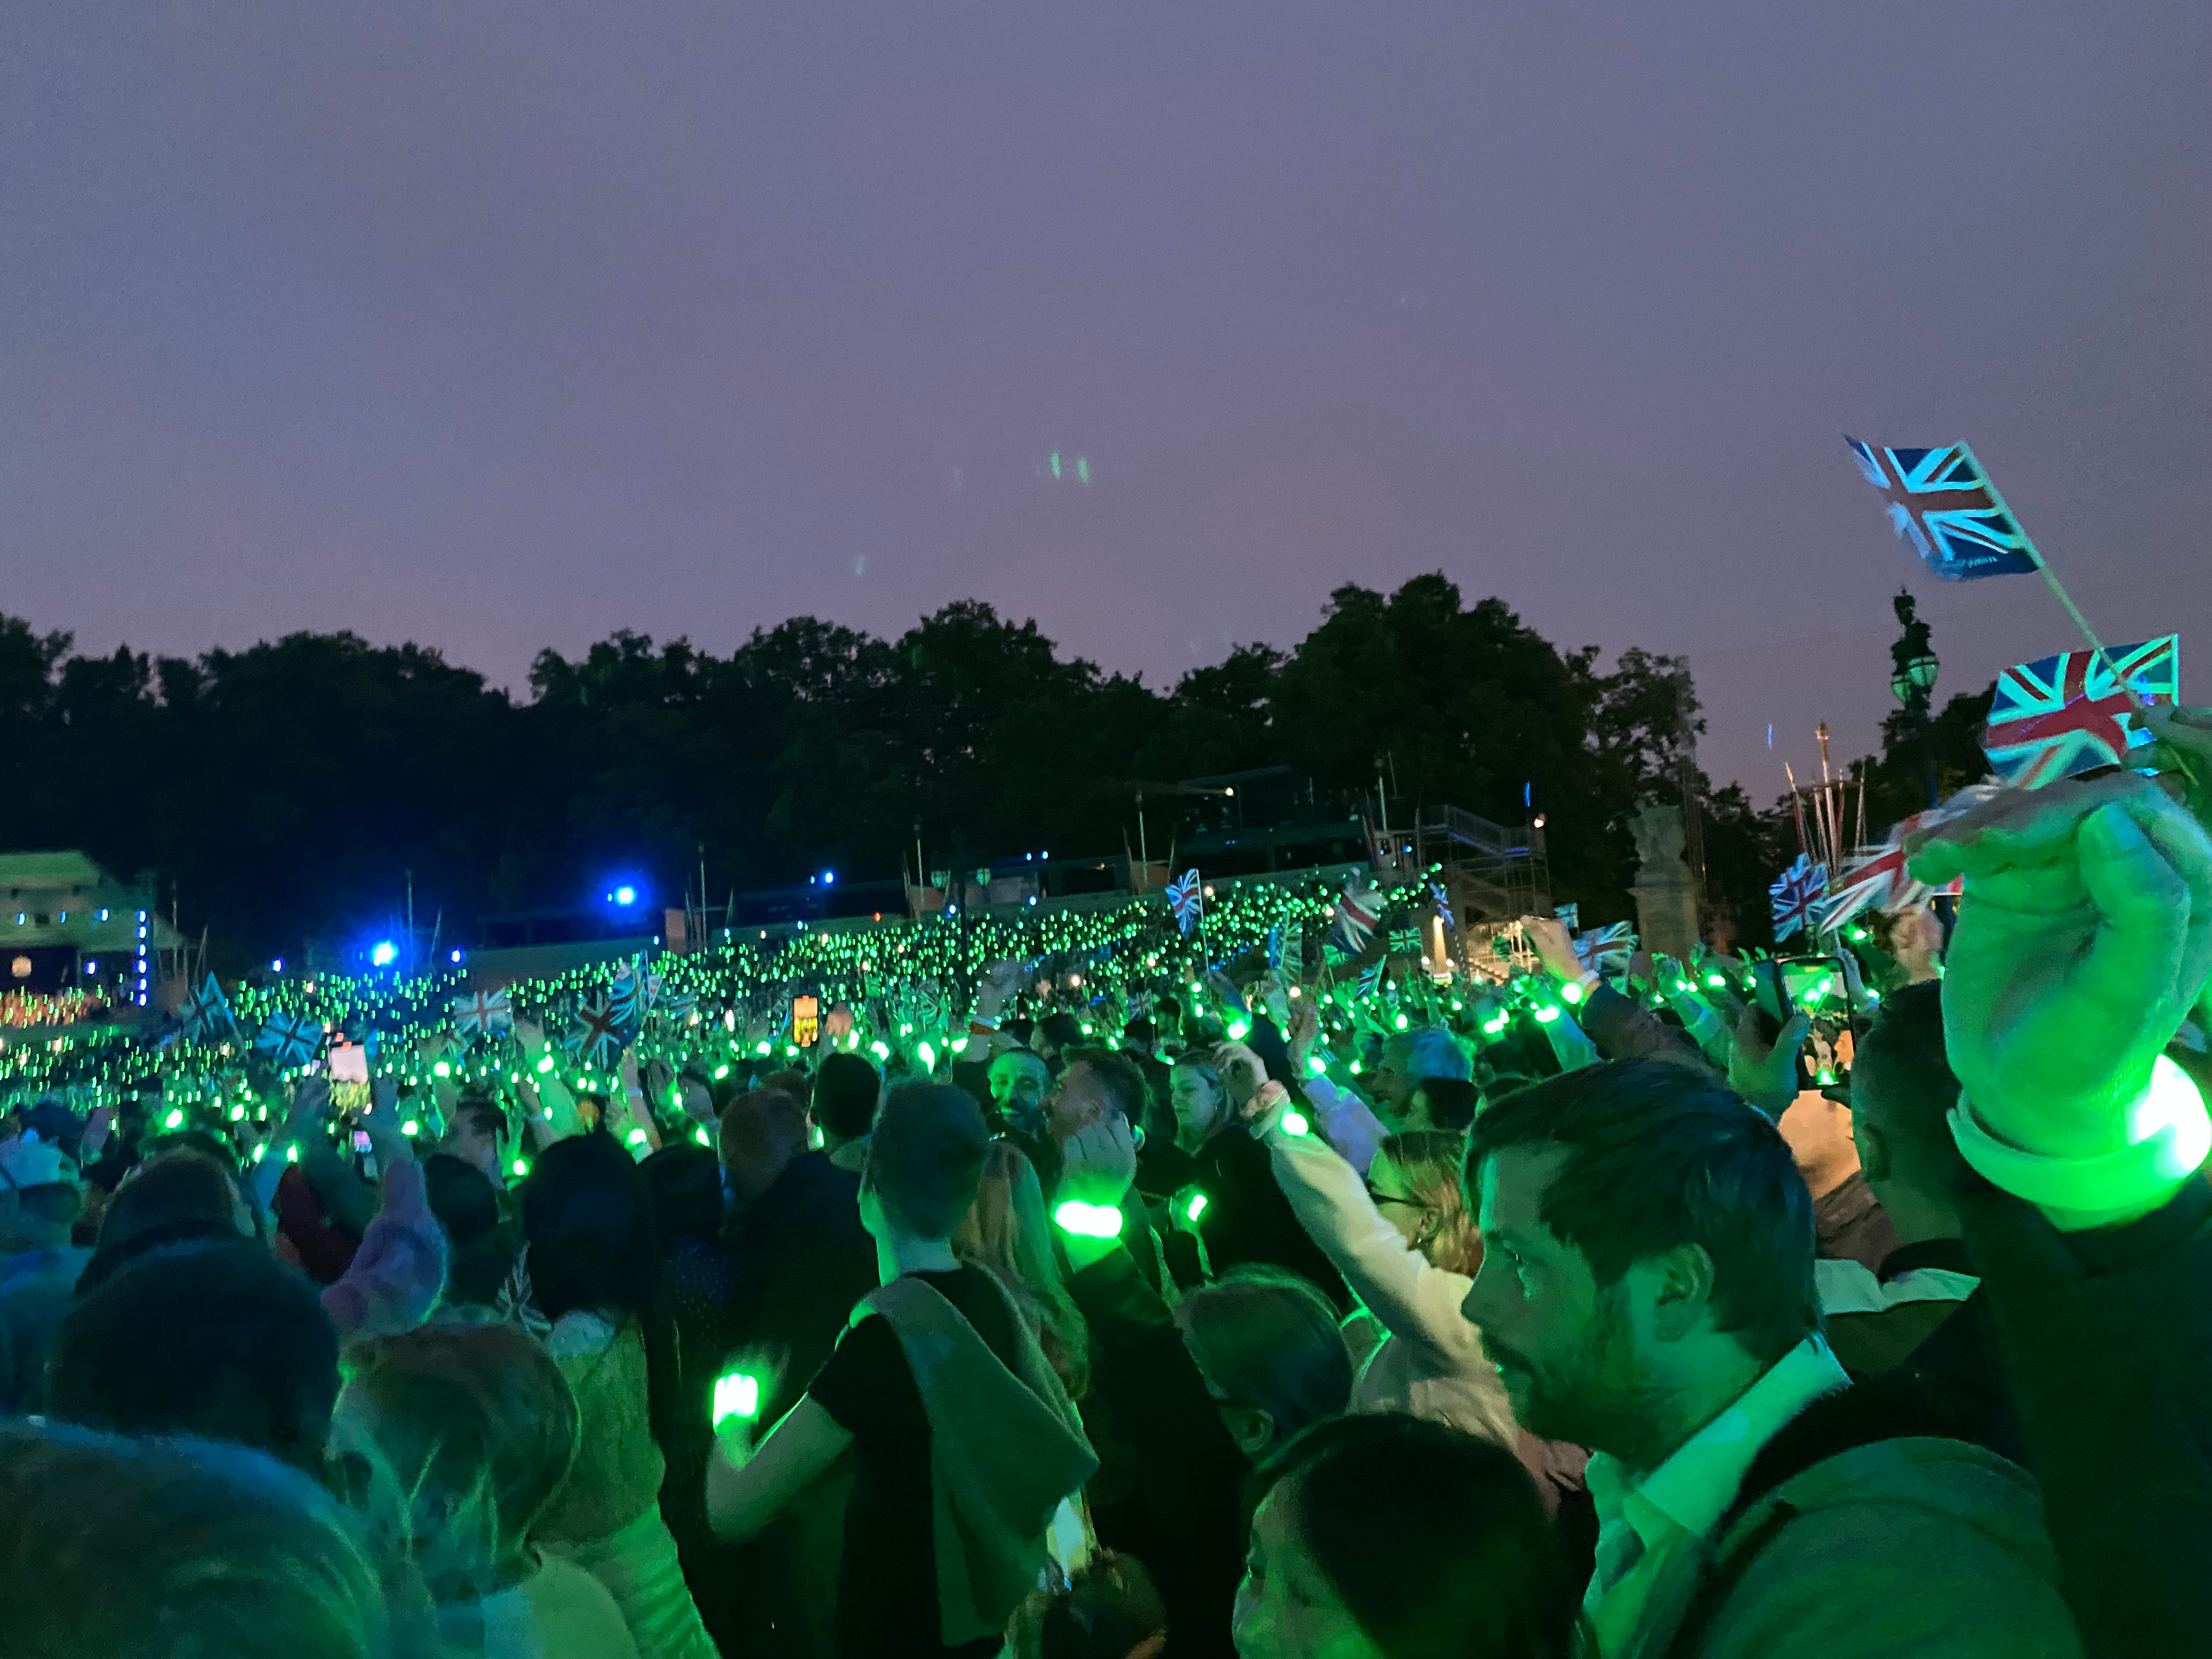 Salesforce's wristbands light up and put on a show.